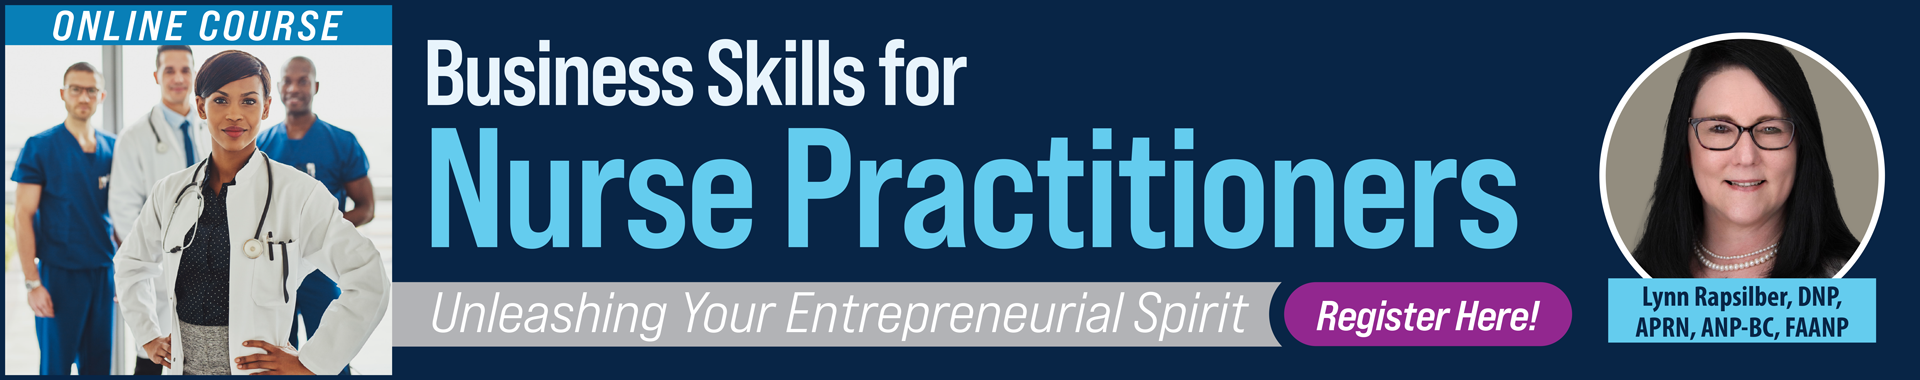 Business Skills for Nurse Practitioners: Unleashing Your Entrepreneurial Spirit